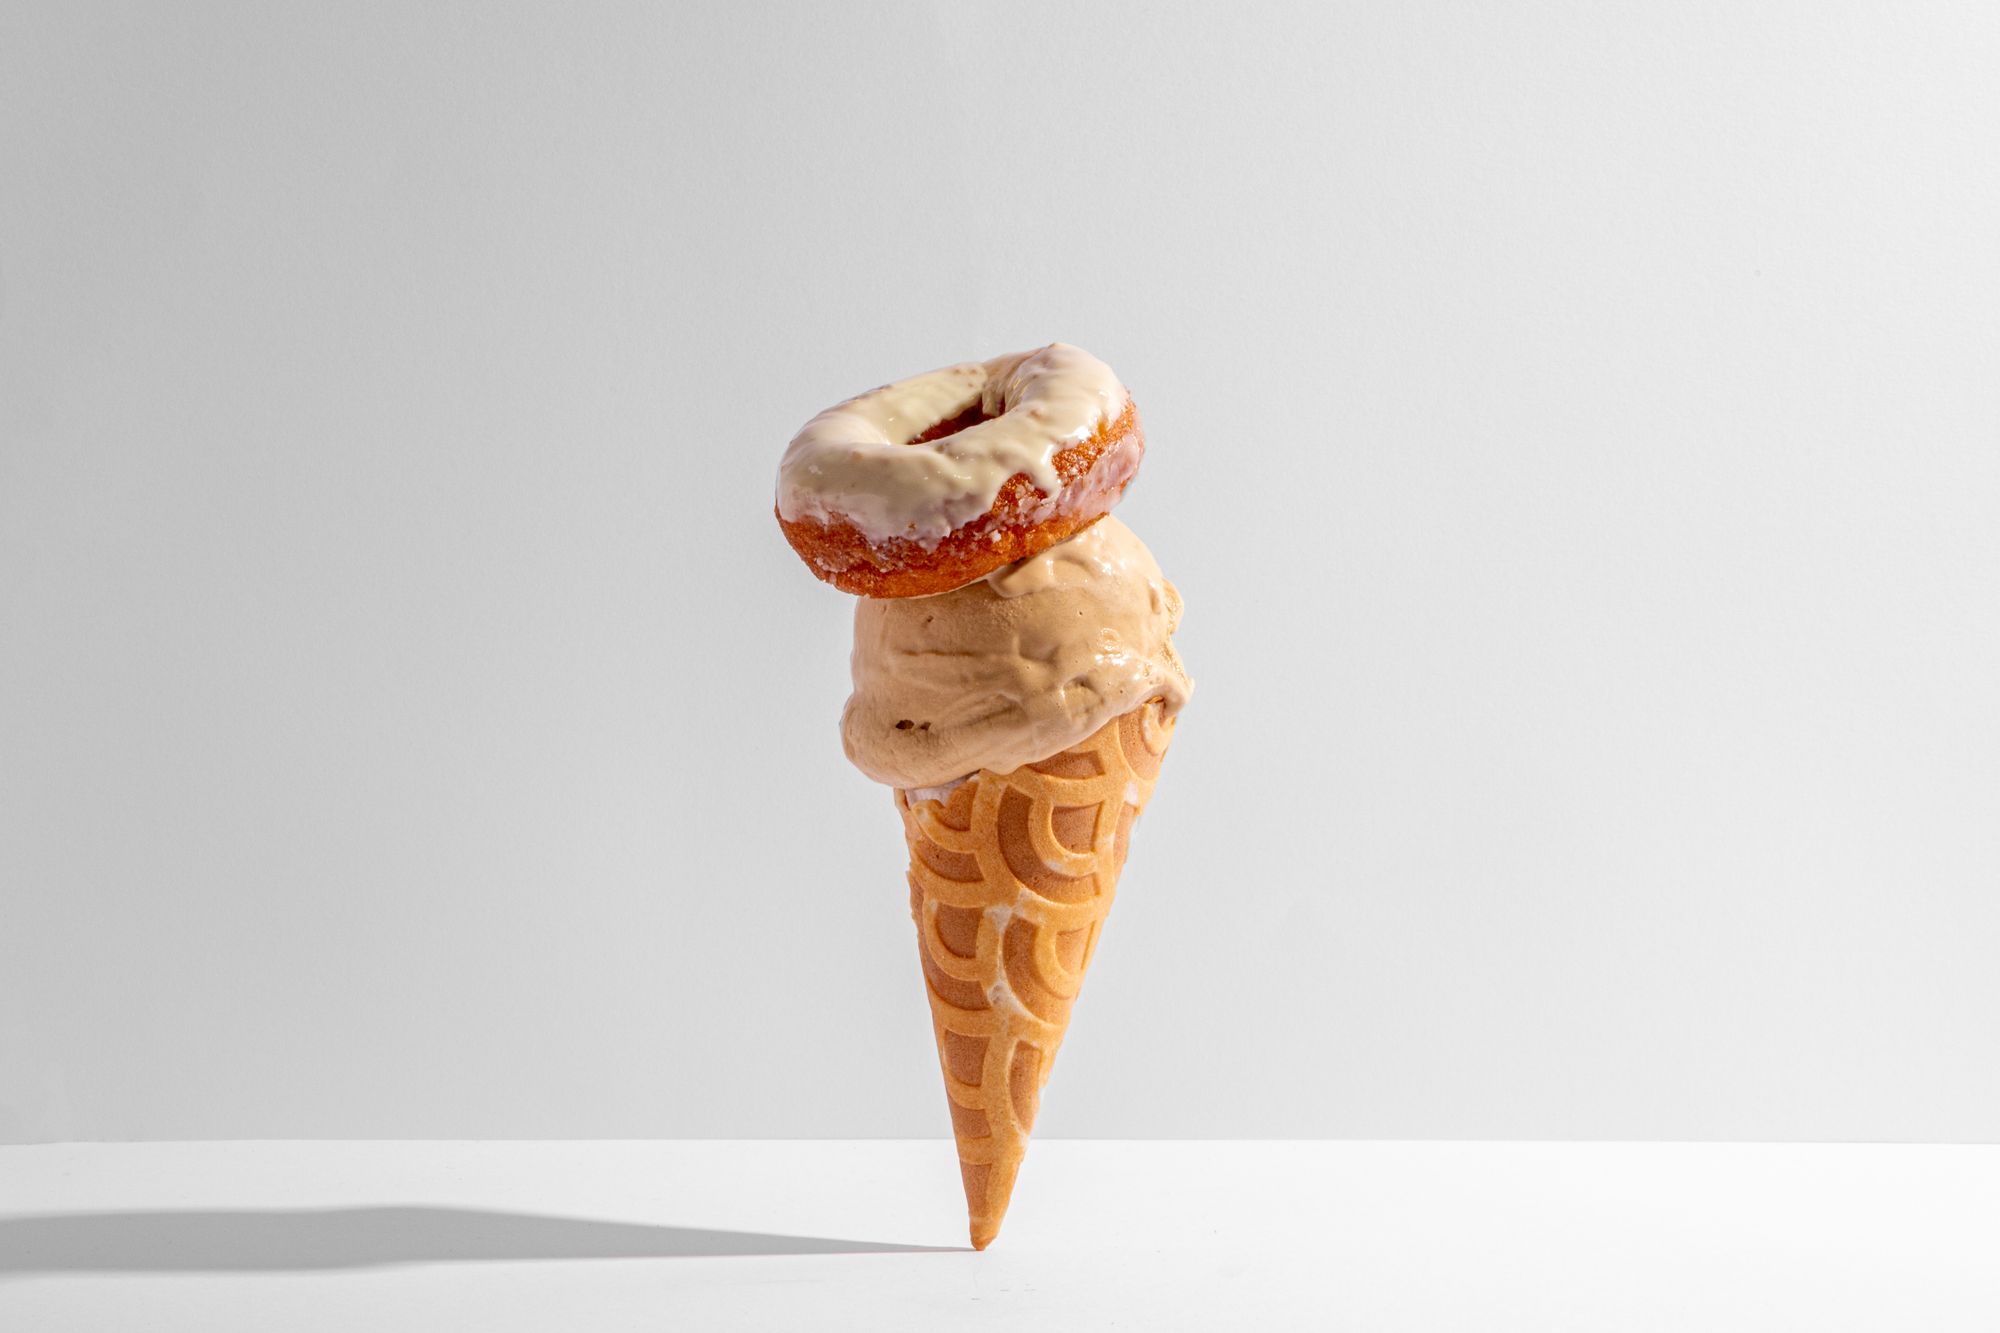 An ice cream cone with a donut sitting on top of the pile of ice cream.